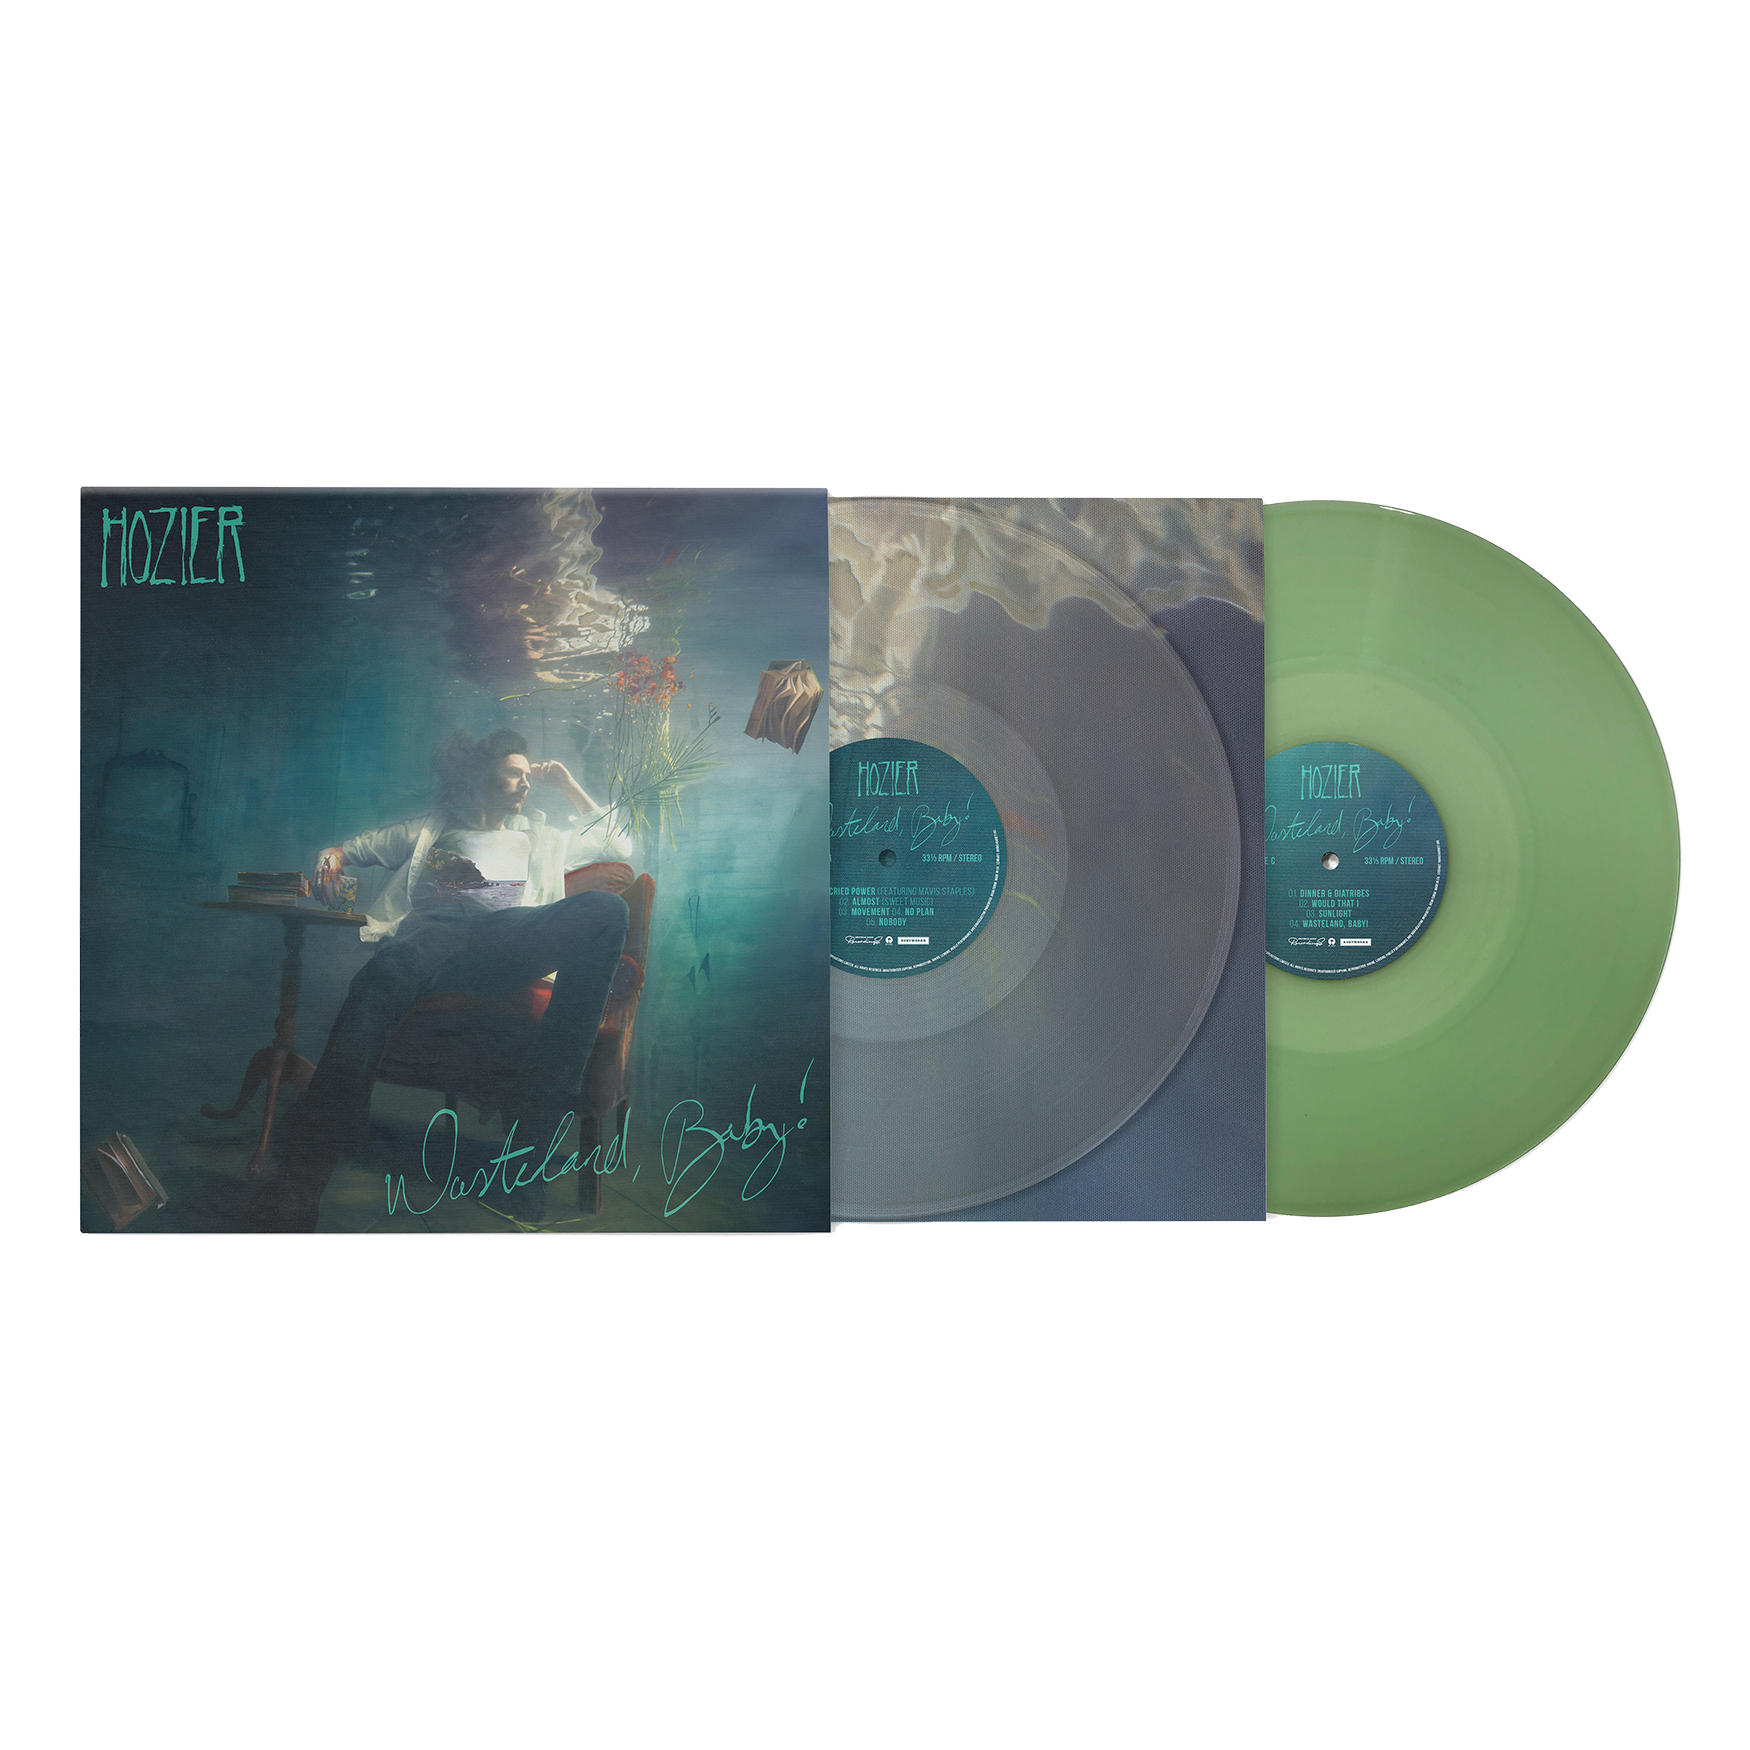 Wasteland, Baby! Limited Ultra Clear & Transparent Green Vinyl 2LP + Exclusive Print